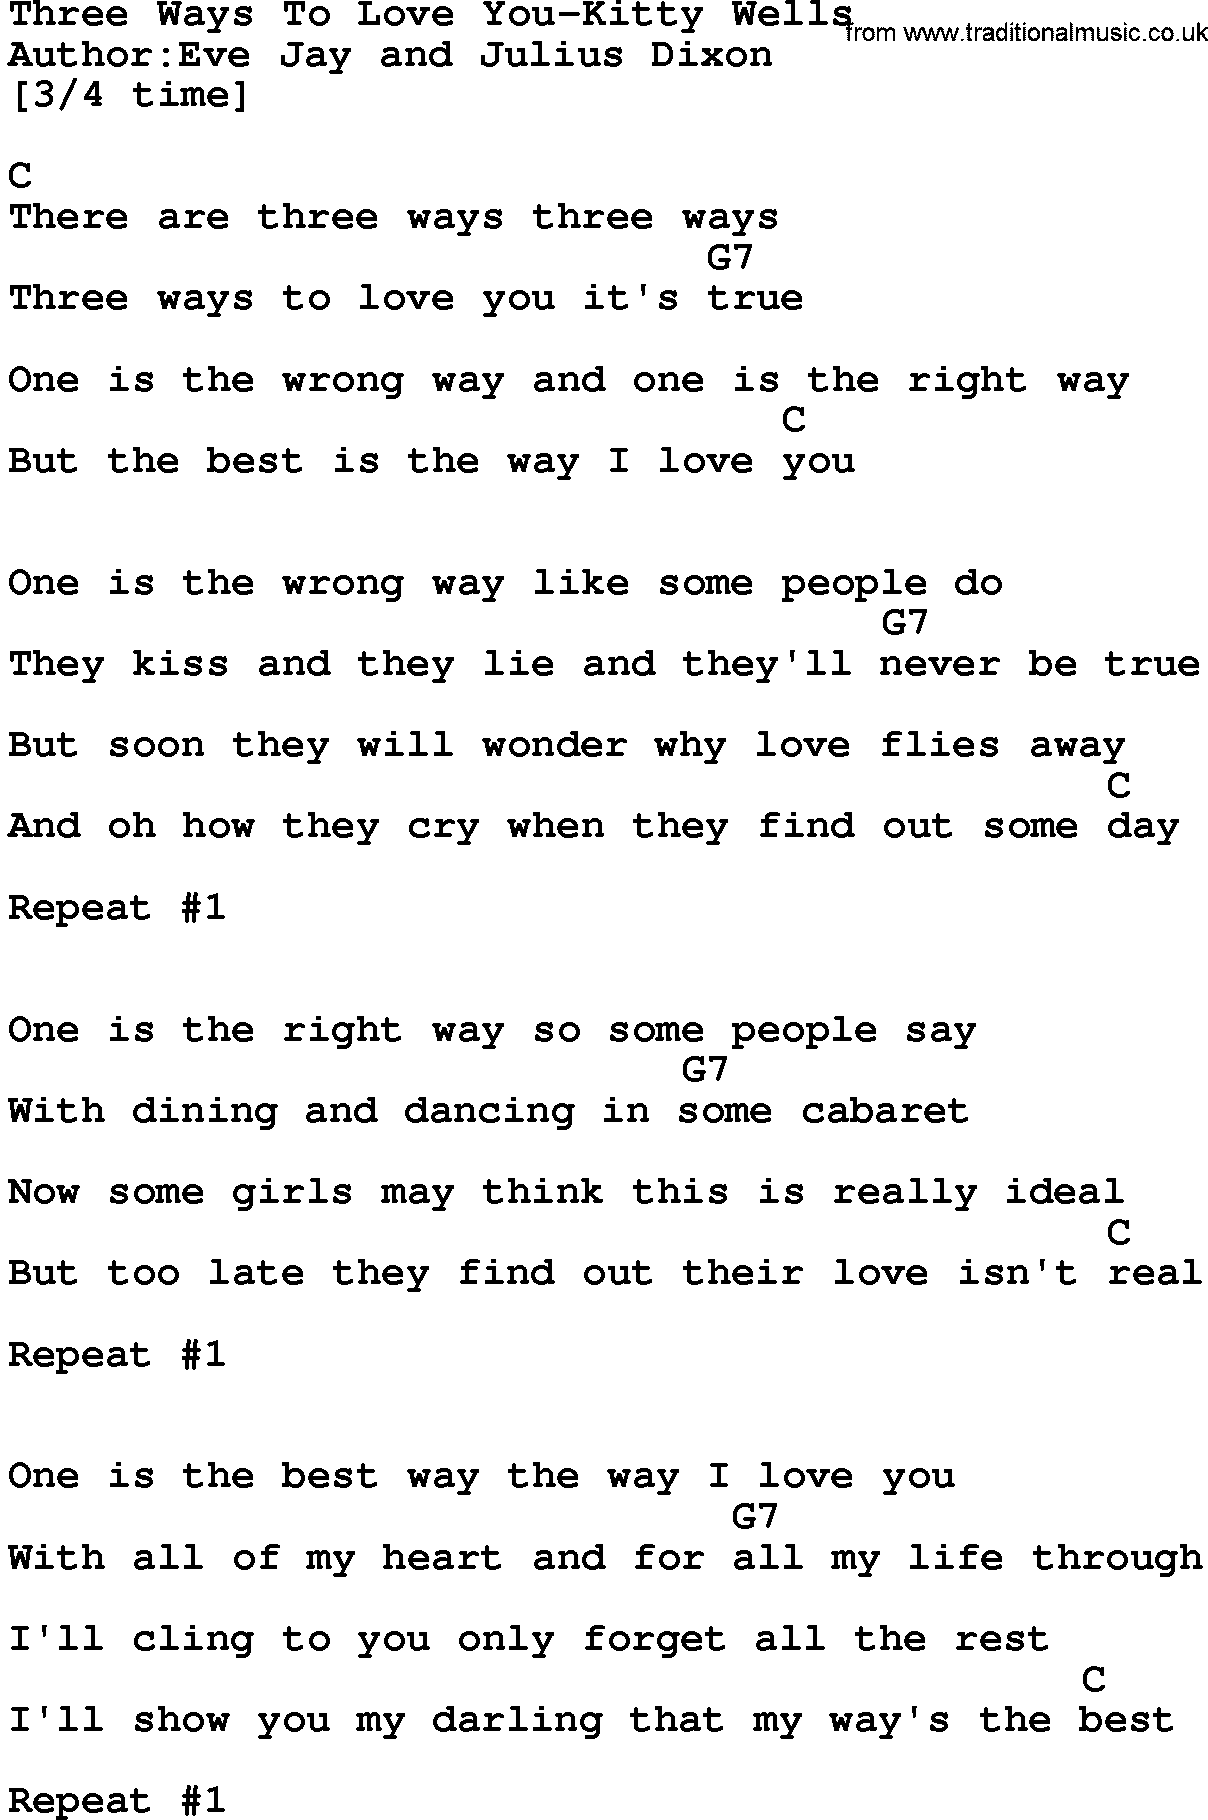 Country music song: Three Ways To Love You-Kitty Wells lyrics and chords